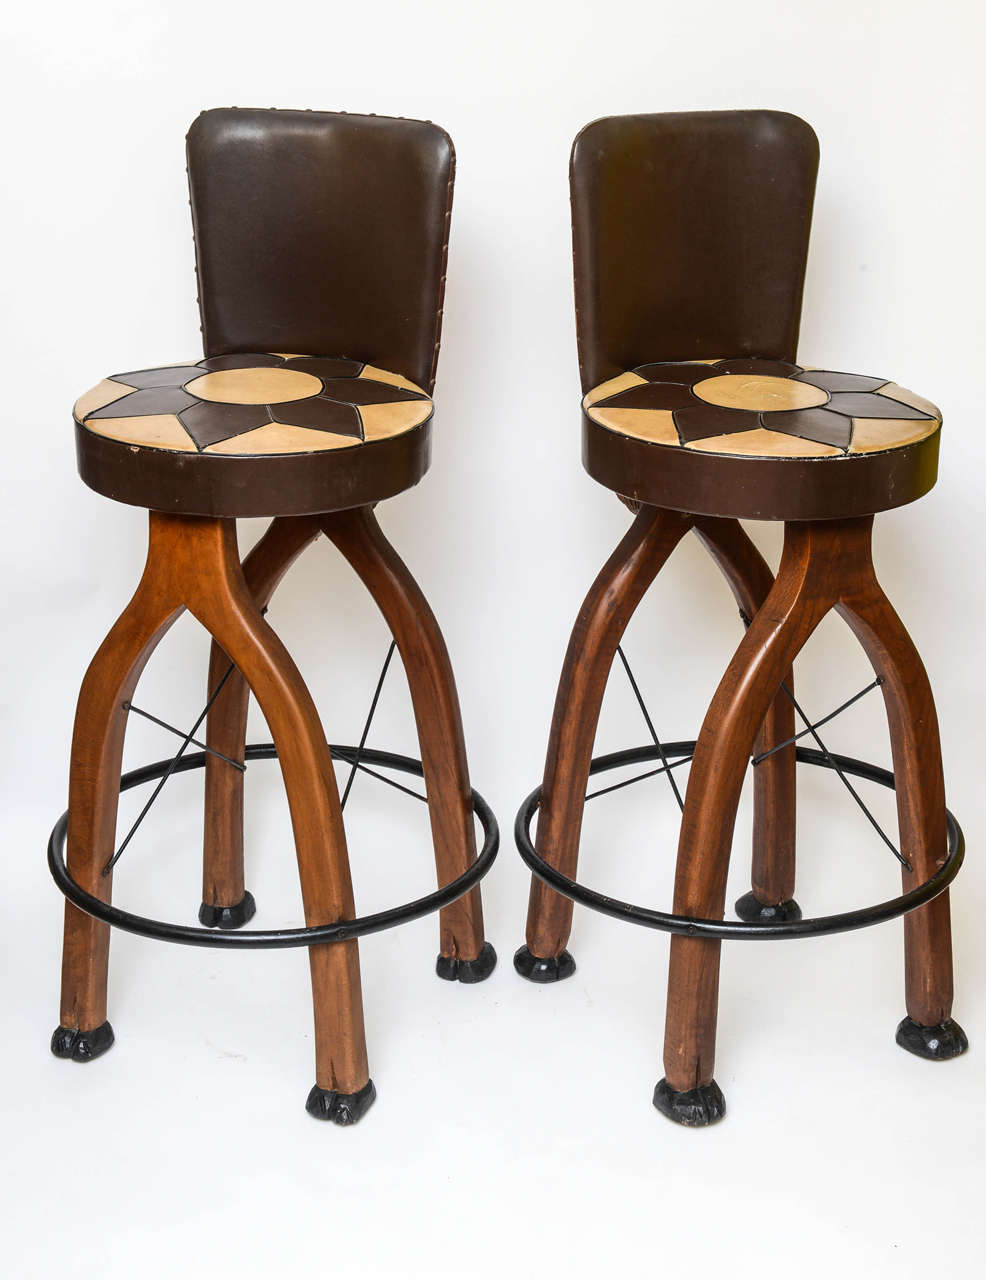 Outstanding fanciful bar stools with camel motif wood carvings head, neck and feet. The stools appointed with iron footrests. The leather like seat covers are original (worn).